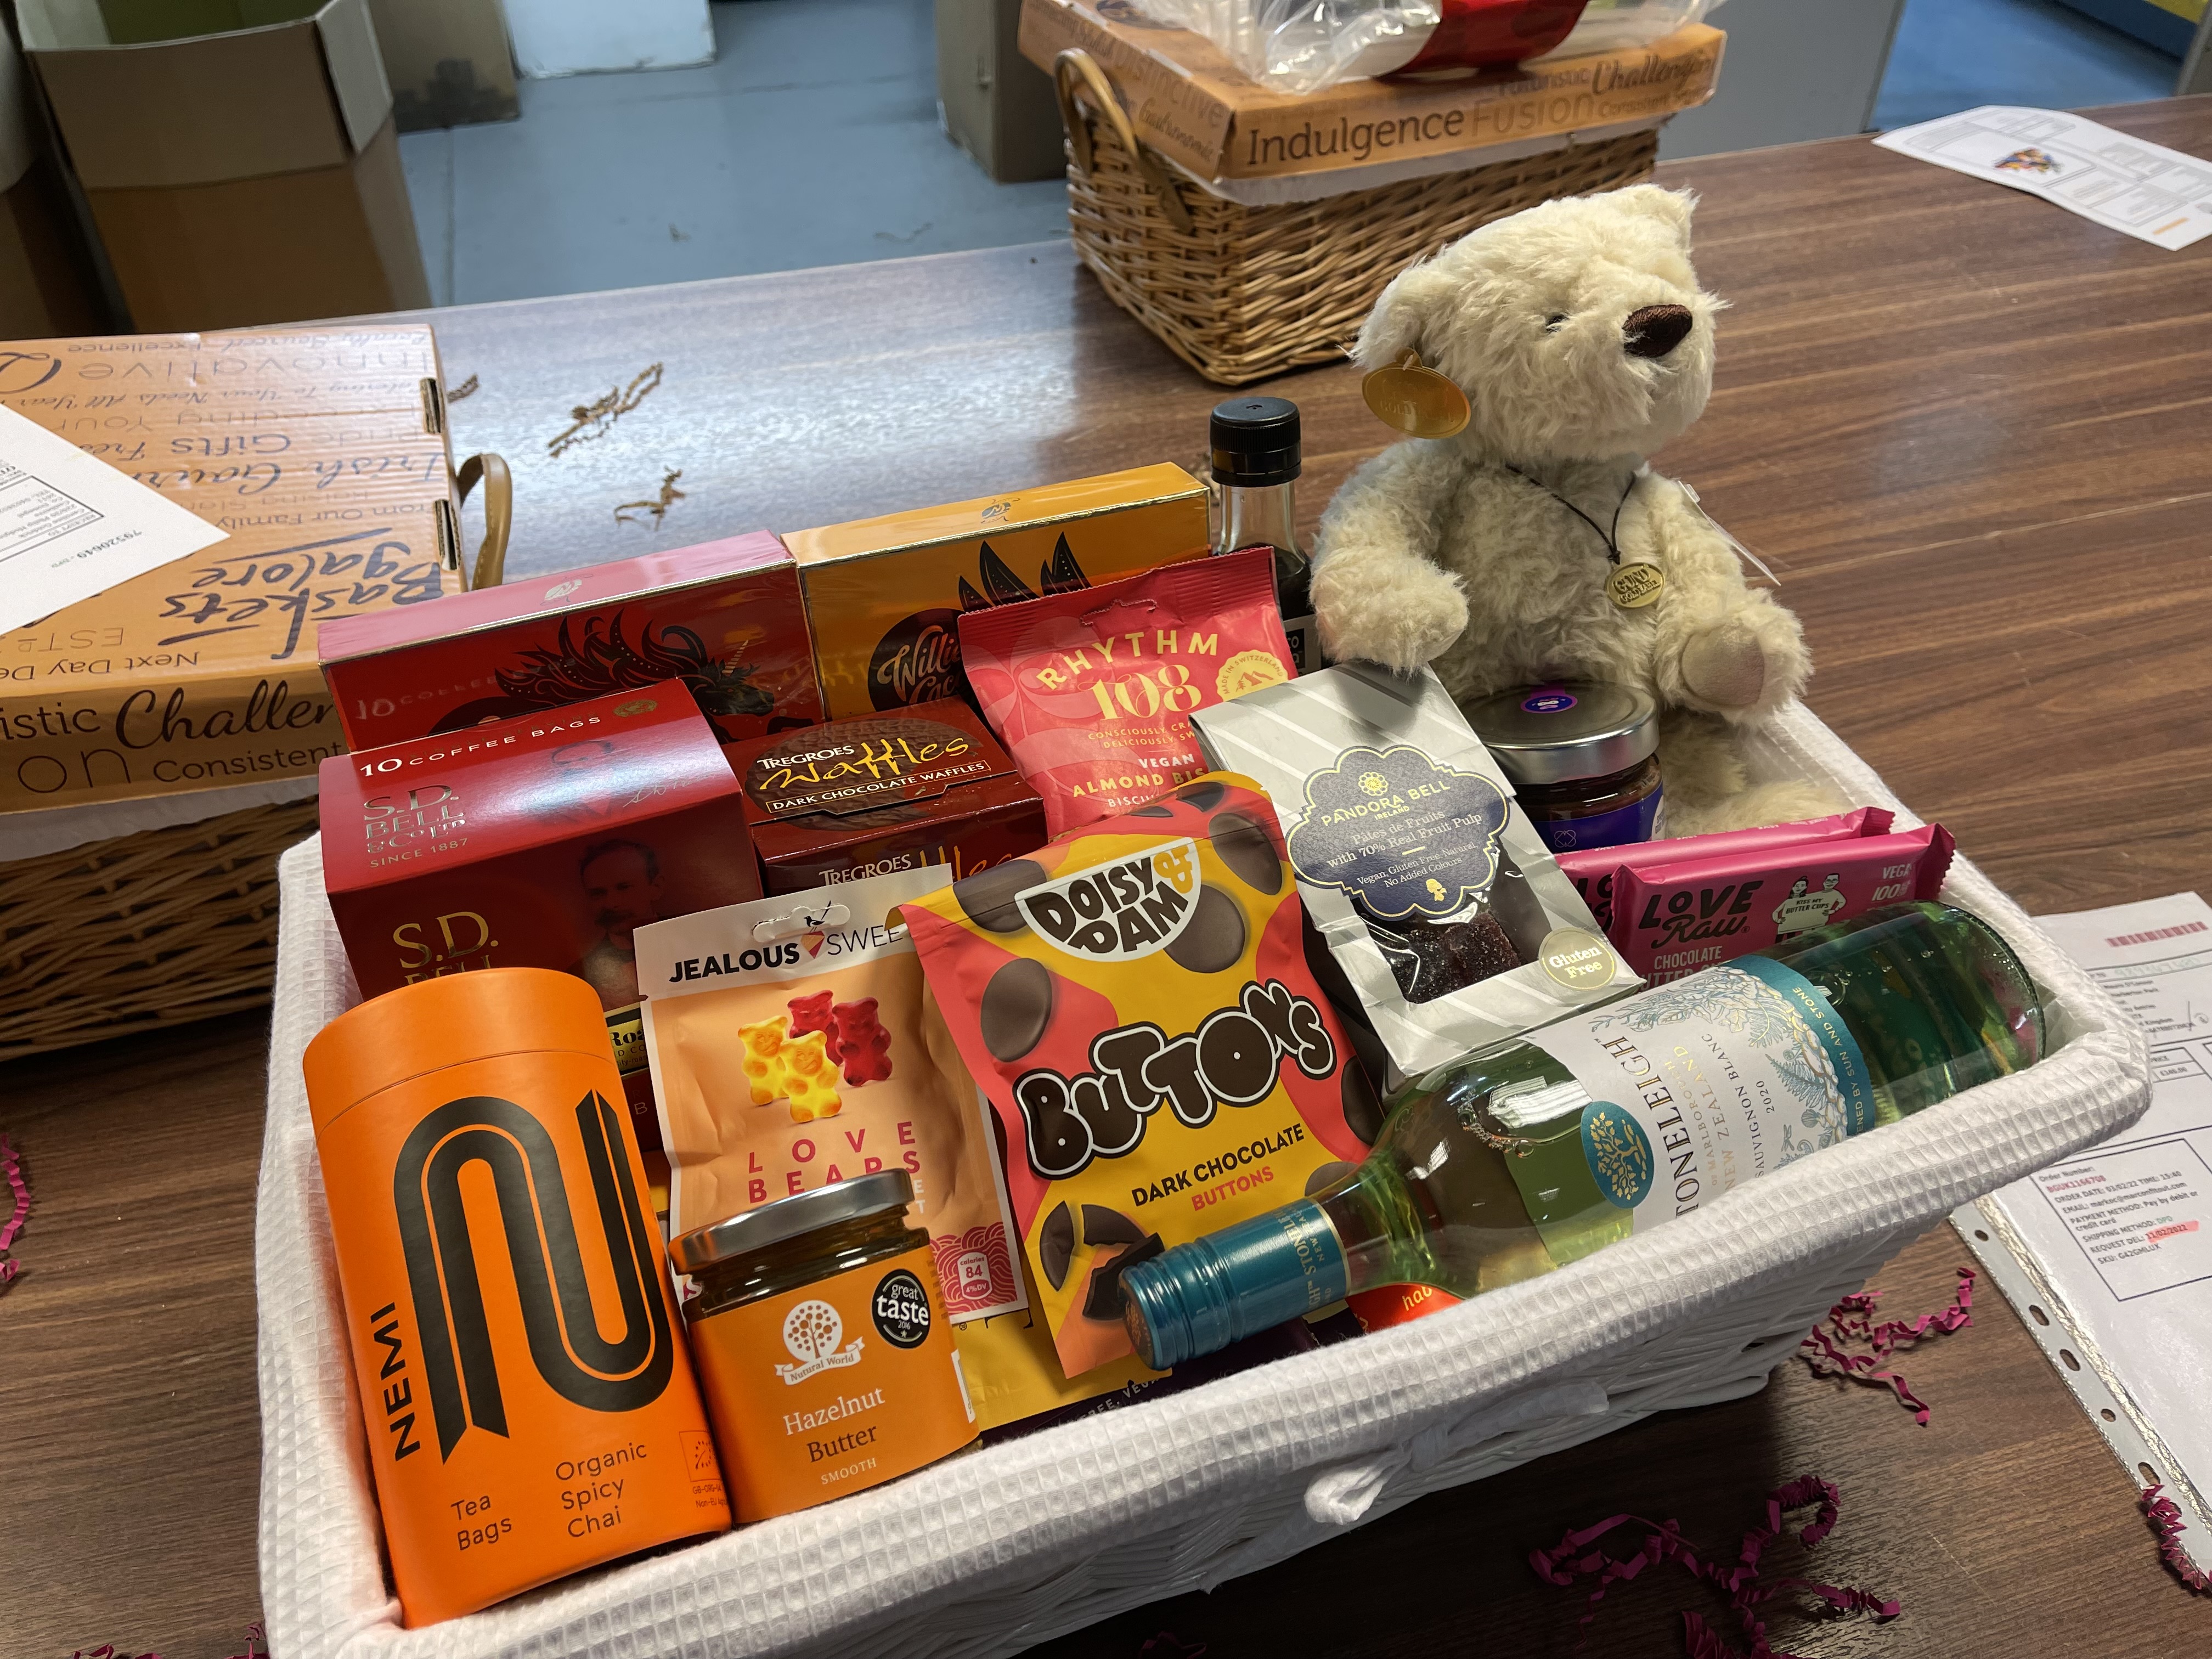 Mystery Gift Basket - Teddy is the clue